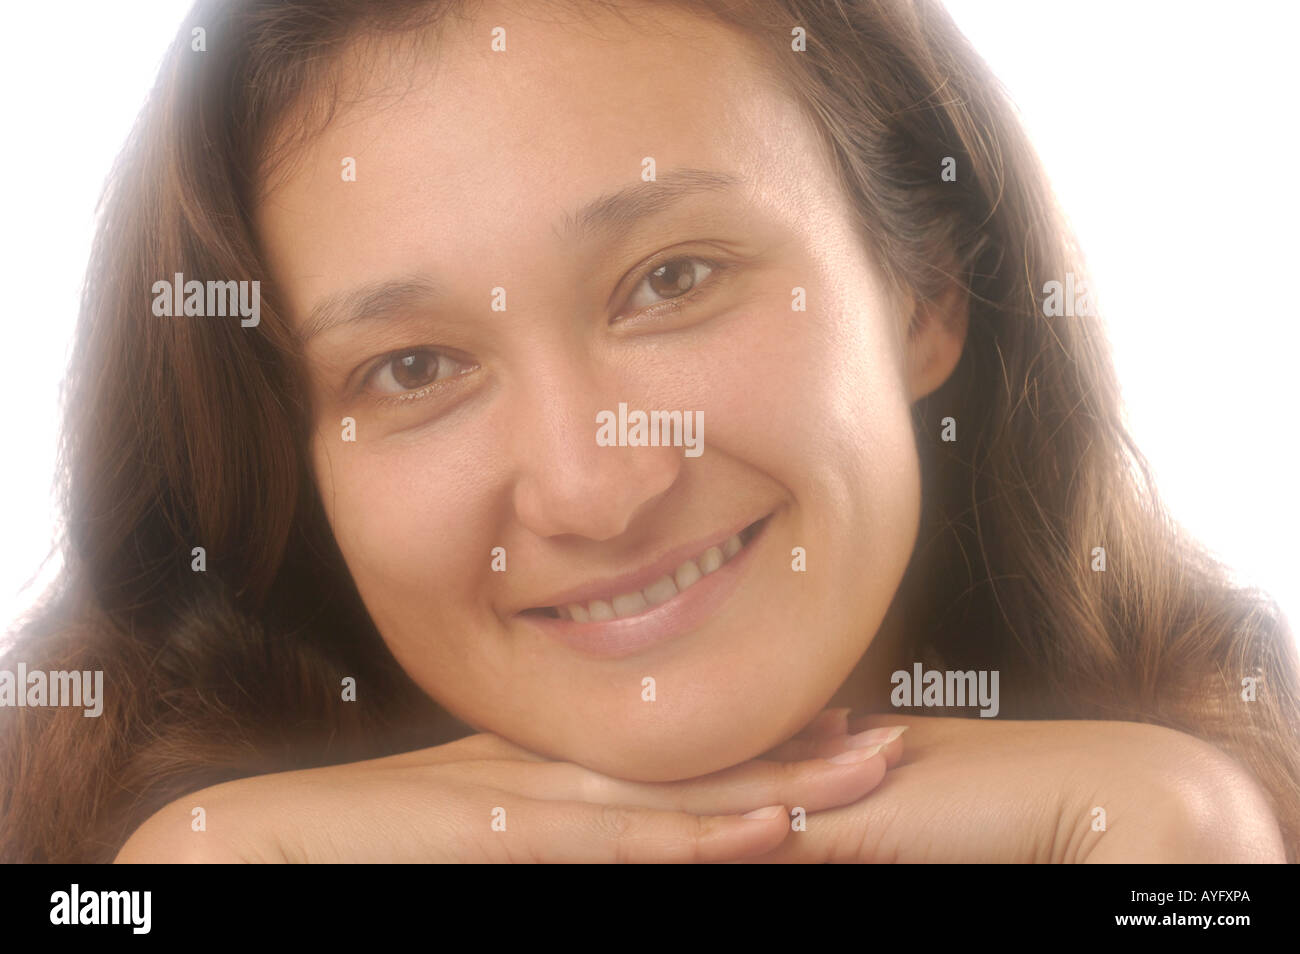 Young smiling woman Banque D'Images